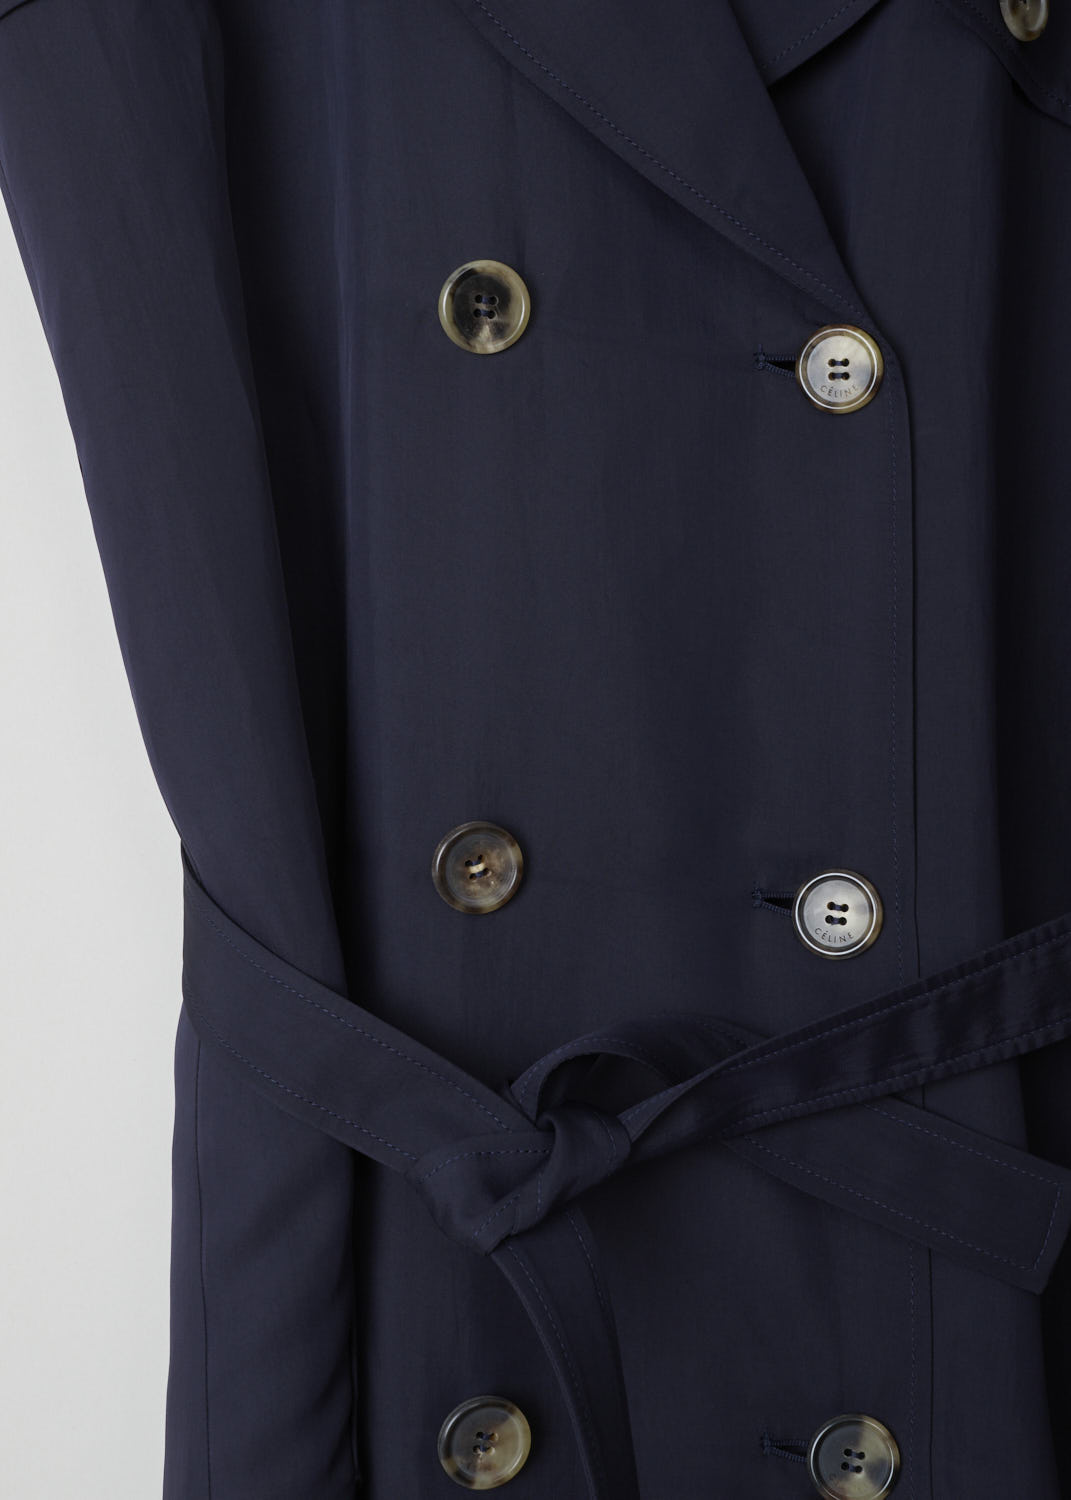 CÃ‰LINE, MIDNIGHT BLUE RAINCOAT, 6464_28U36_0MI_C01, Blue, Detail, Elegant midnight blue trench coat. The coat has a notched lapel and classic details such as epaulets and storm flaps. Two rows of buttons form the closing option. The coat comes with a matching belt to cinch in the waist. The long sleeves have sleeve straps on the cuffs. A slanted pocket can be found on either side. In the back, the coat has a centre slit.